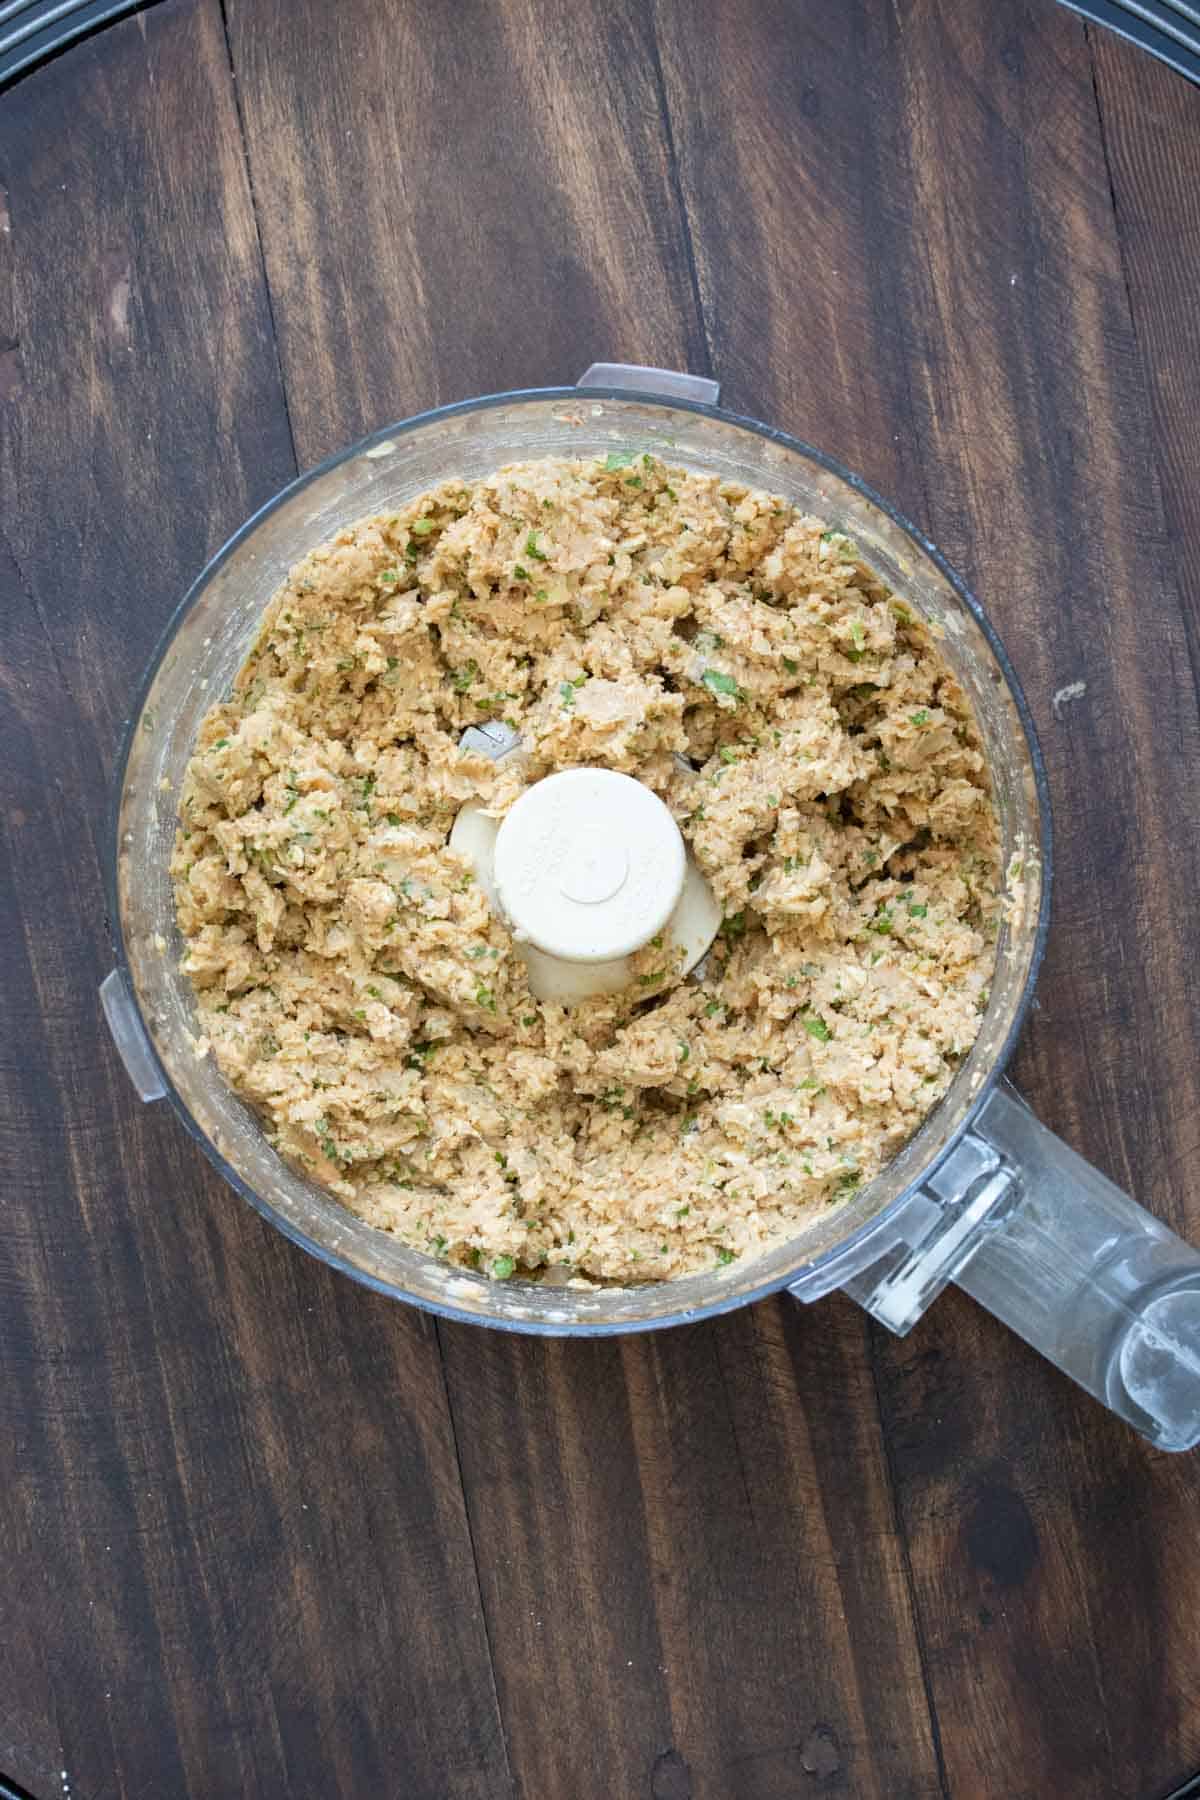 Top view of a food processor with veggie burger mixture